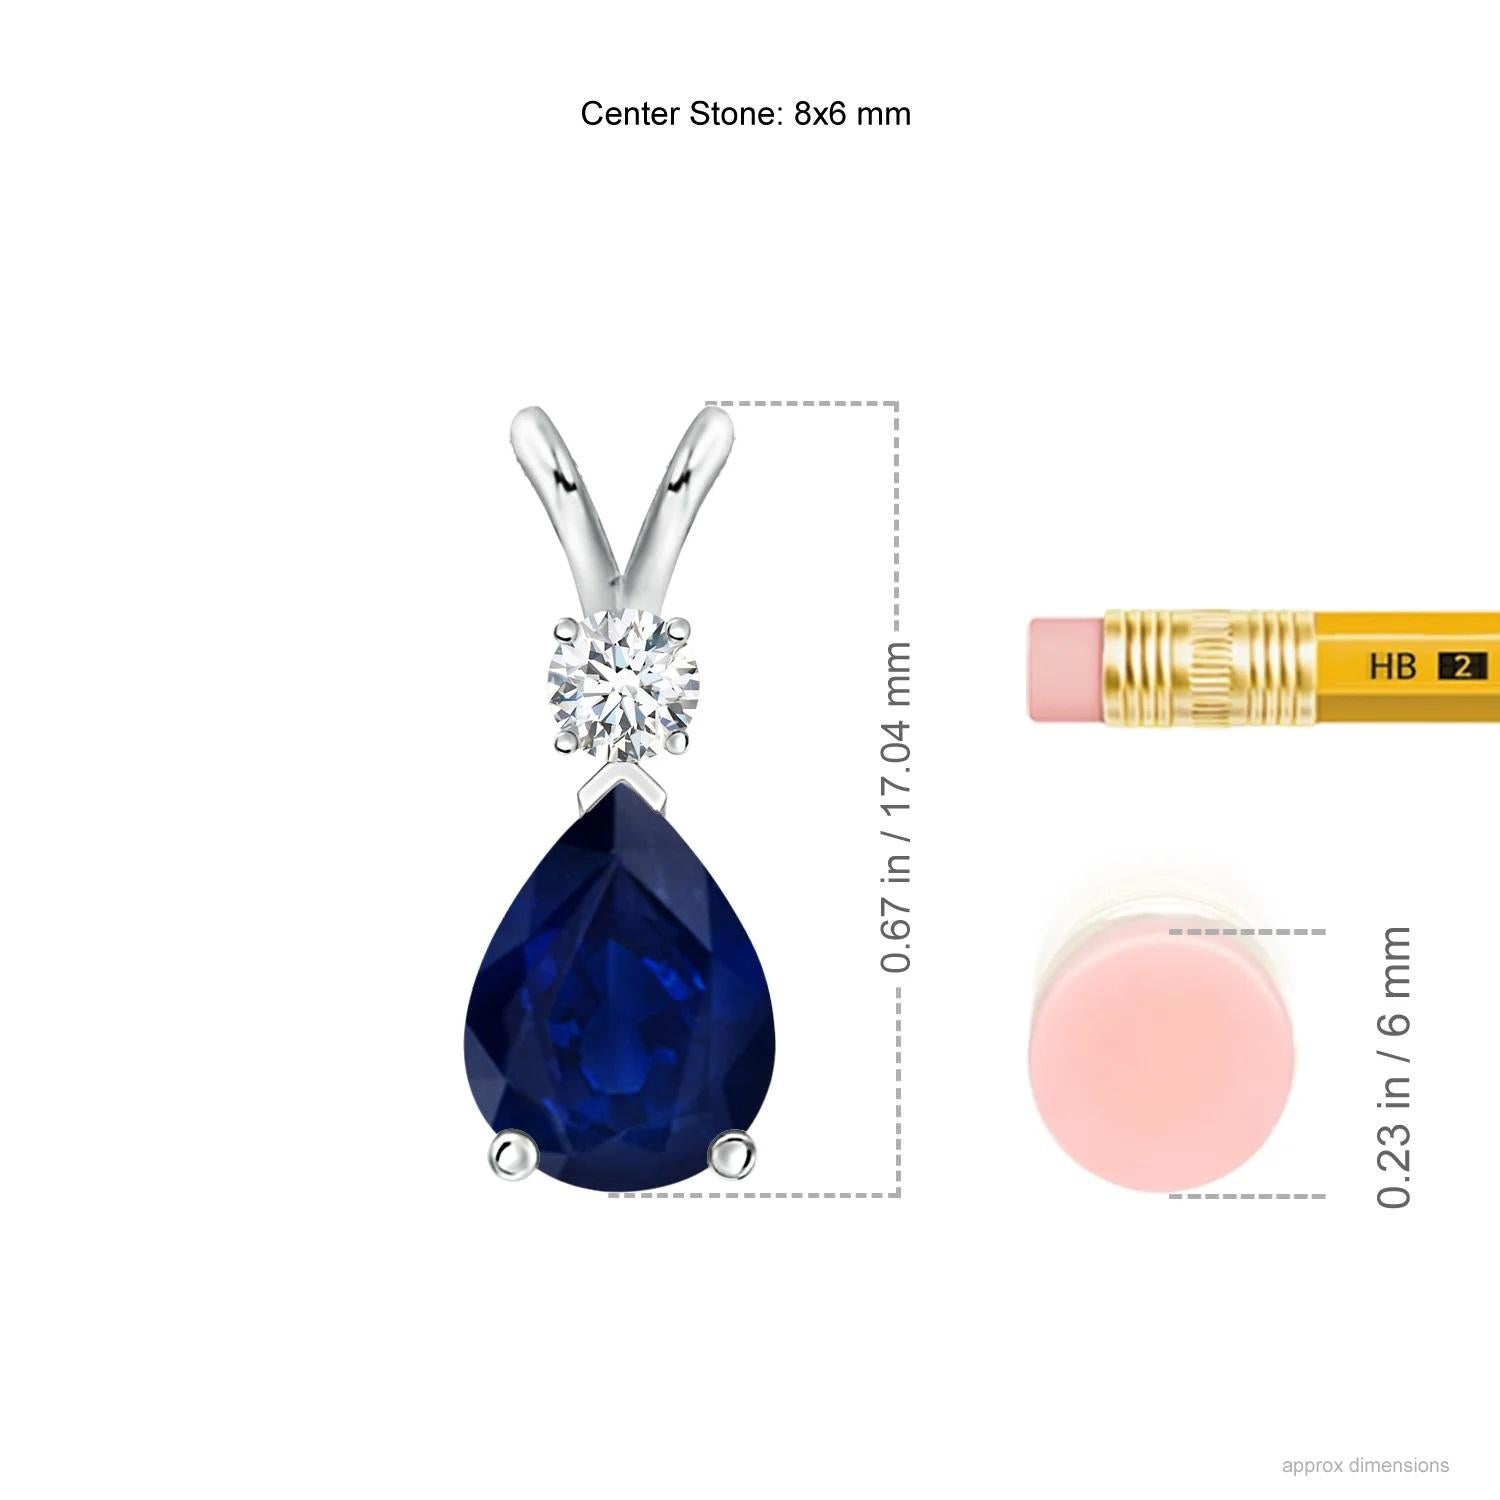 This classic solitaire pendant features a pear-shaped sapphire secured in a prong setting. A brilliant round diamond sits atop the blue gemstone adding to the design's charm. Simple yet appealing, this sapphire pendant in 14k white gold is crafted